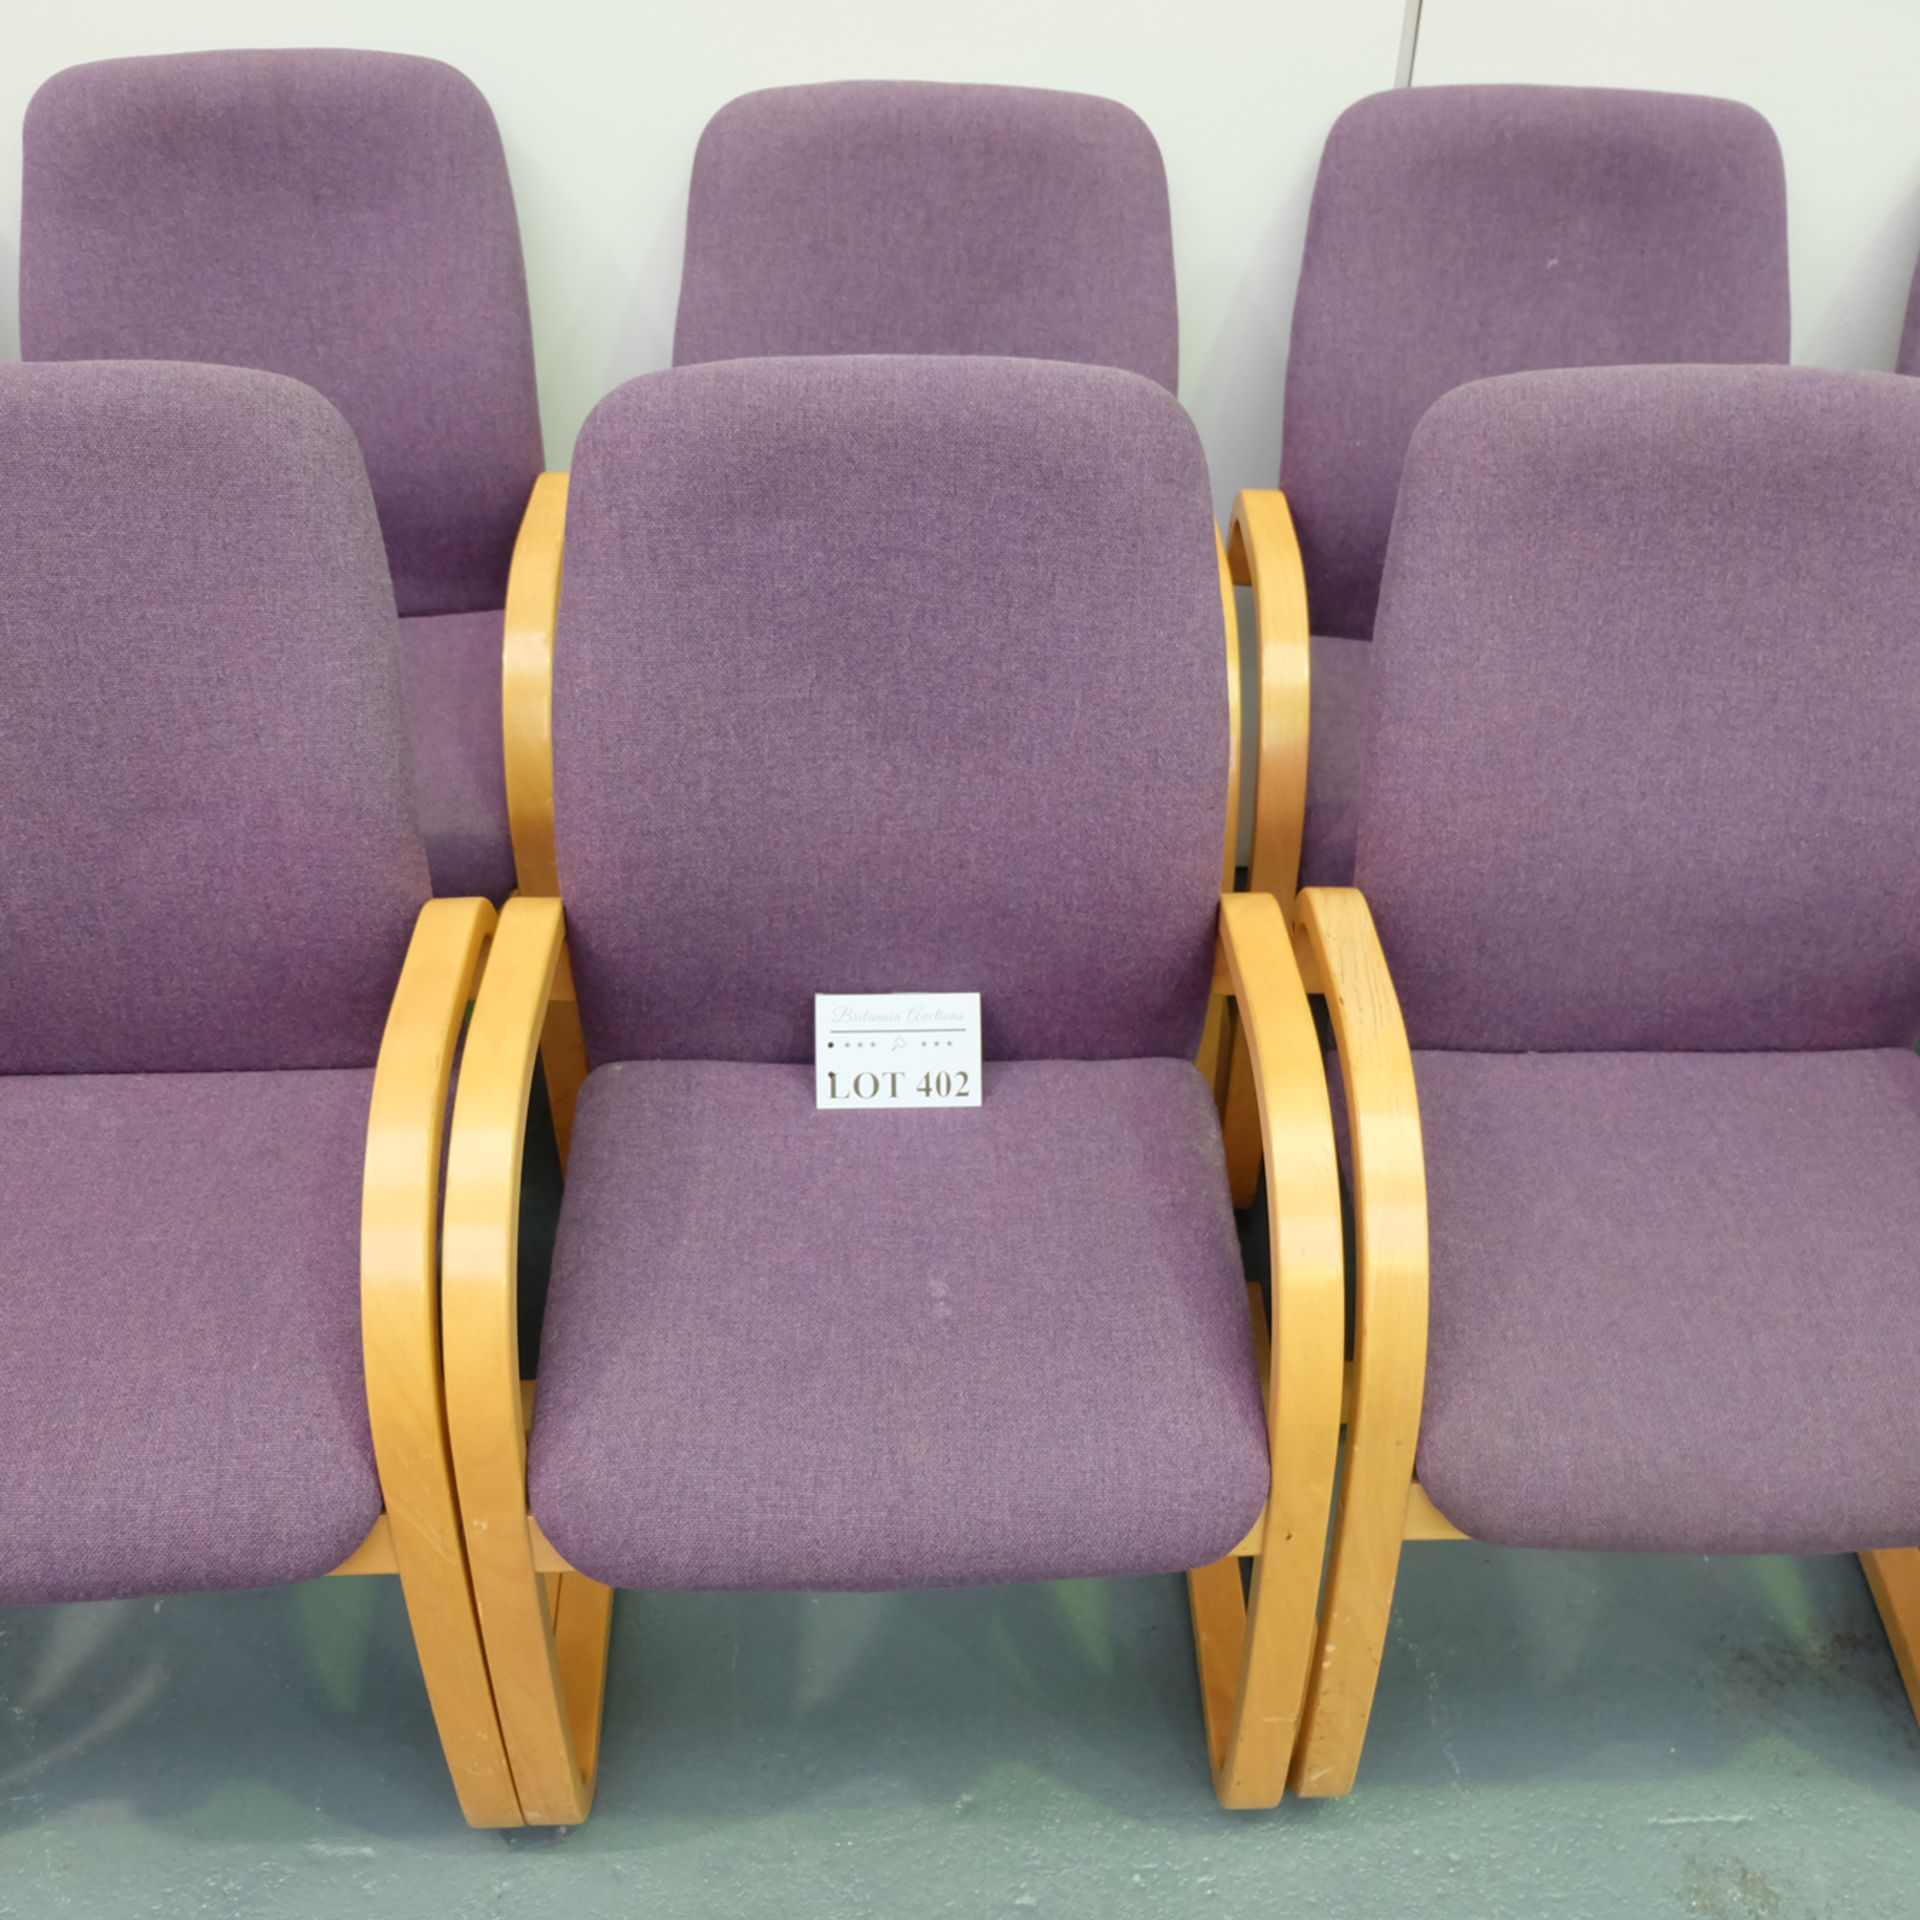 9 x Conference Chairs. - Image 4 of 5